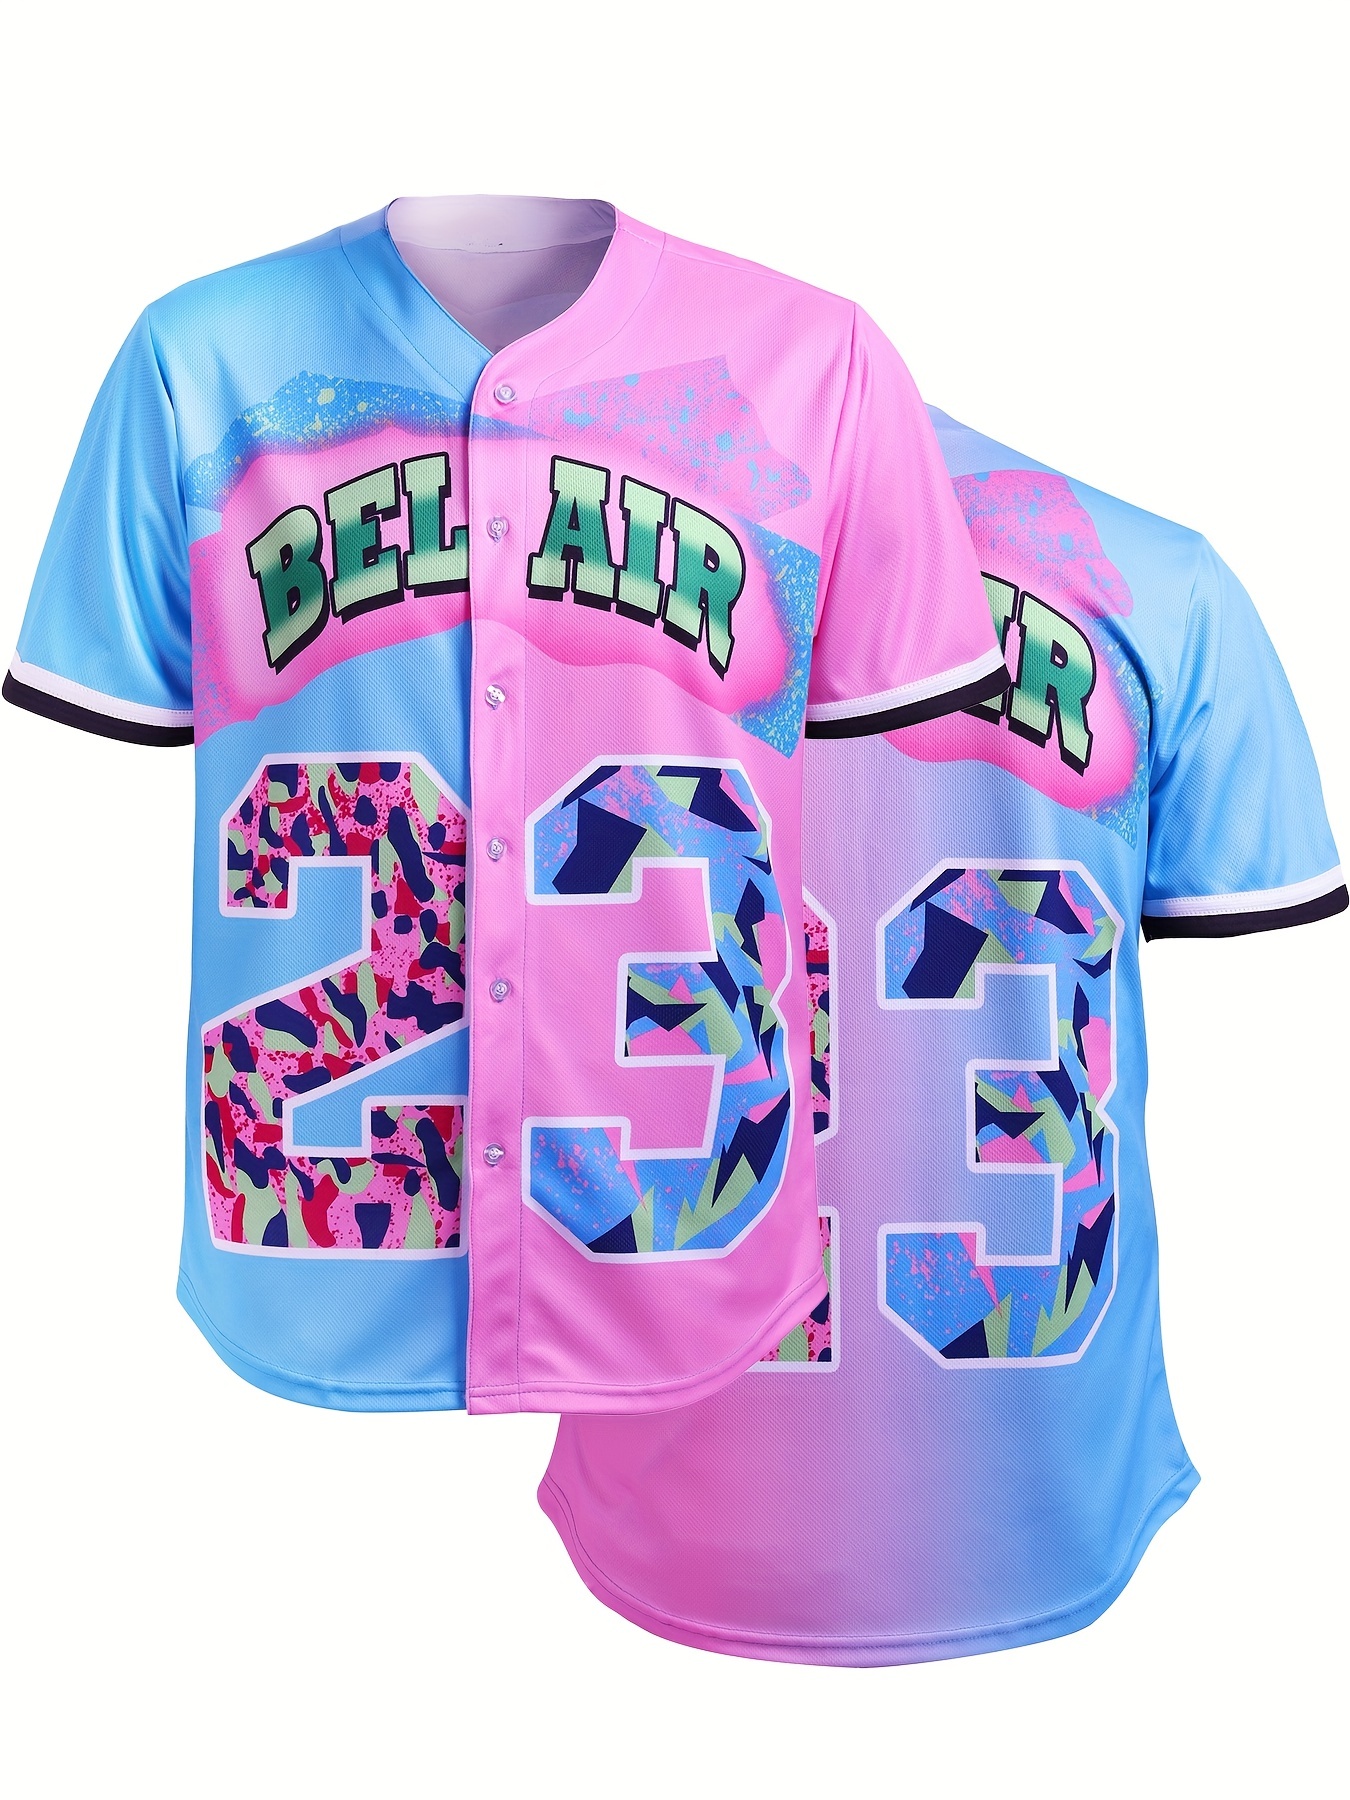 Men's Bel Air #23 Baseball Jersey, 90's City Theme Party Clothing, Hip Hop Gradient Button Up Short Sleeve Shirt Suitable for Birthday Parties,Temu